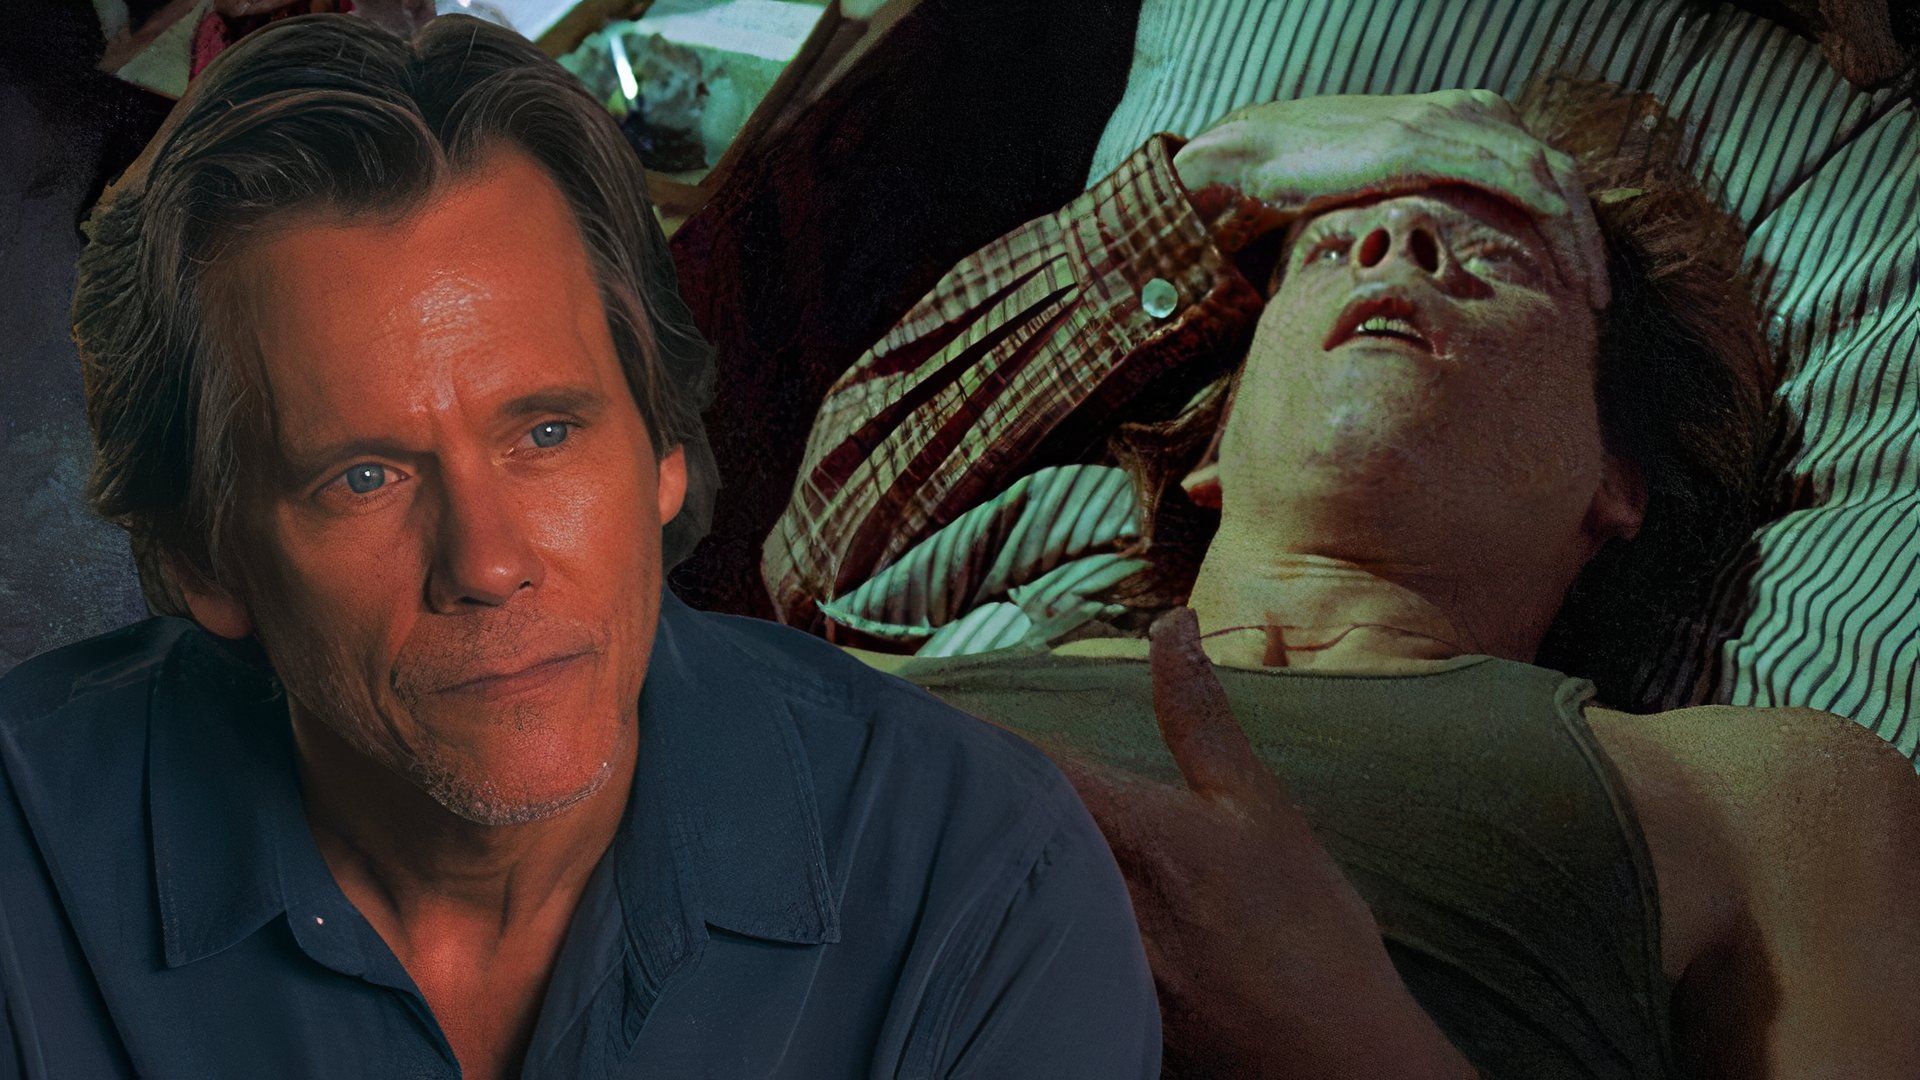 Kevin Bacon in They/Them over an image of his death in Friday the 13th